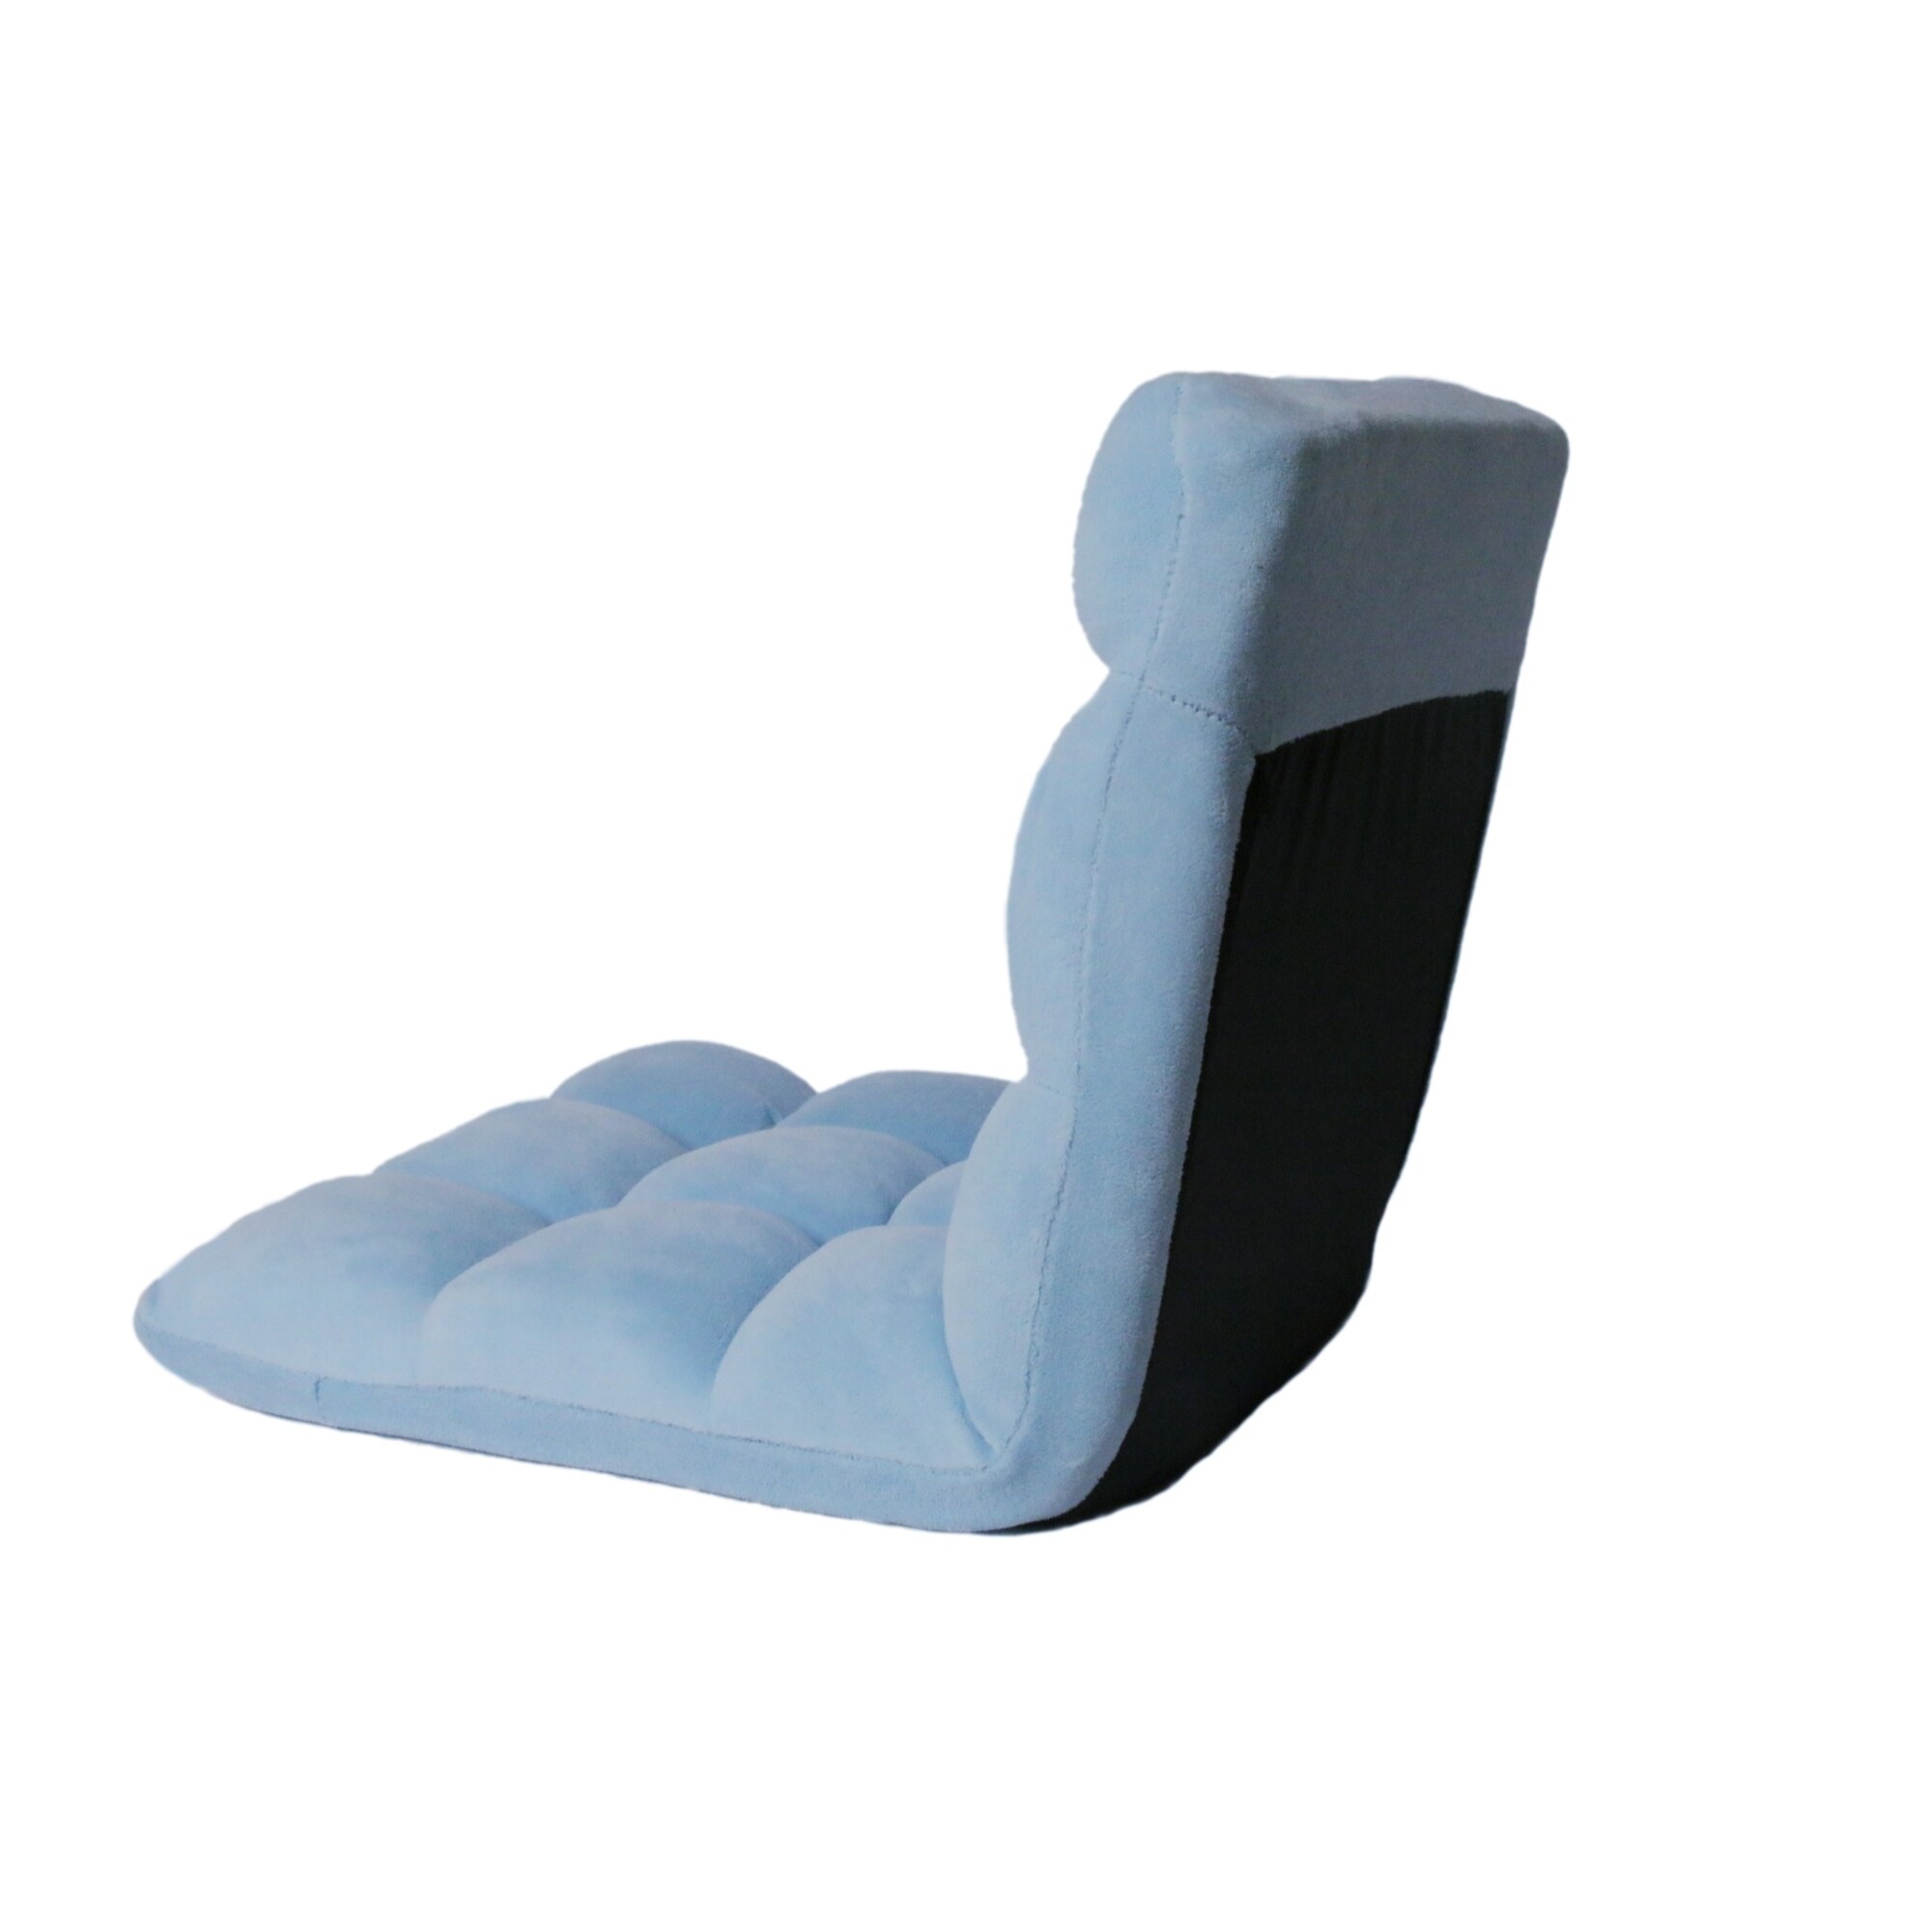 https://ak1.ostkcdn.com/images/products/14819081/Loungie-Microplush-Recliner-Gaming-Chair-Adjustable-Floor-Mat-bee224f1-bb38-4507-8ead-f7695bc94d83.jpg